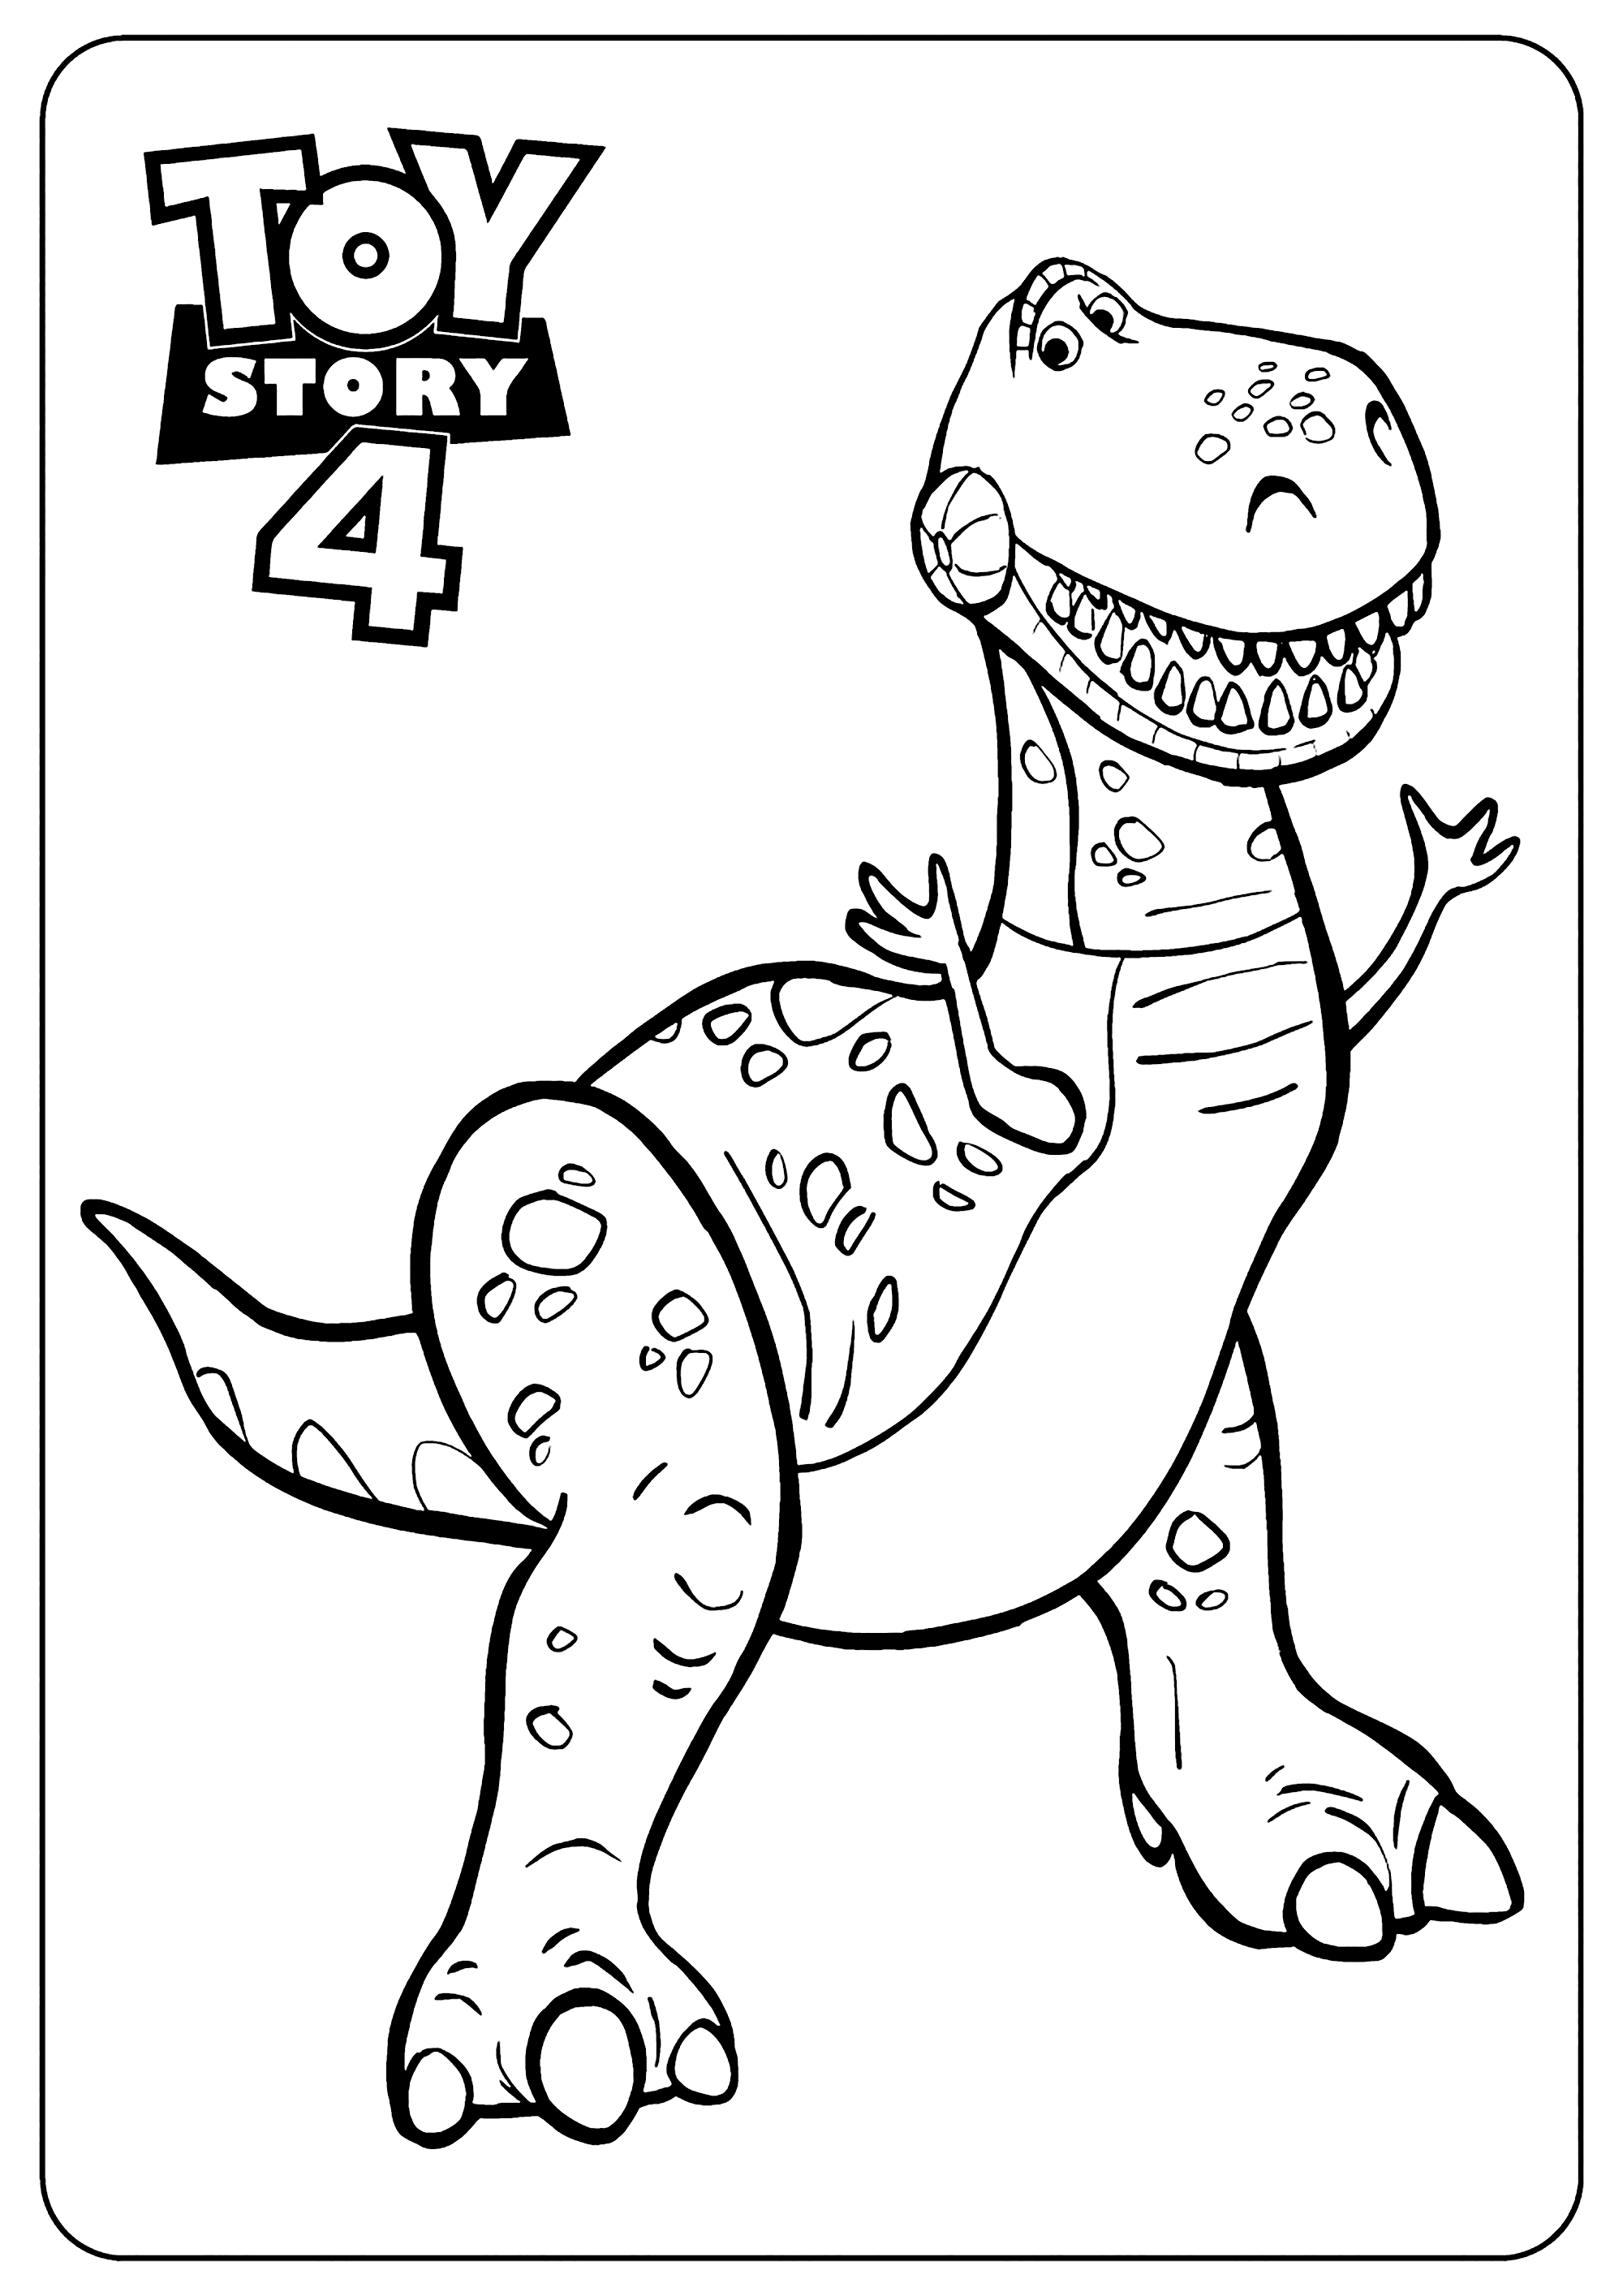 Rex : Cool Toy Story 4 coloring pages - Toy Story 4 Kids Coloring ... - SheetalColor.com